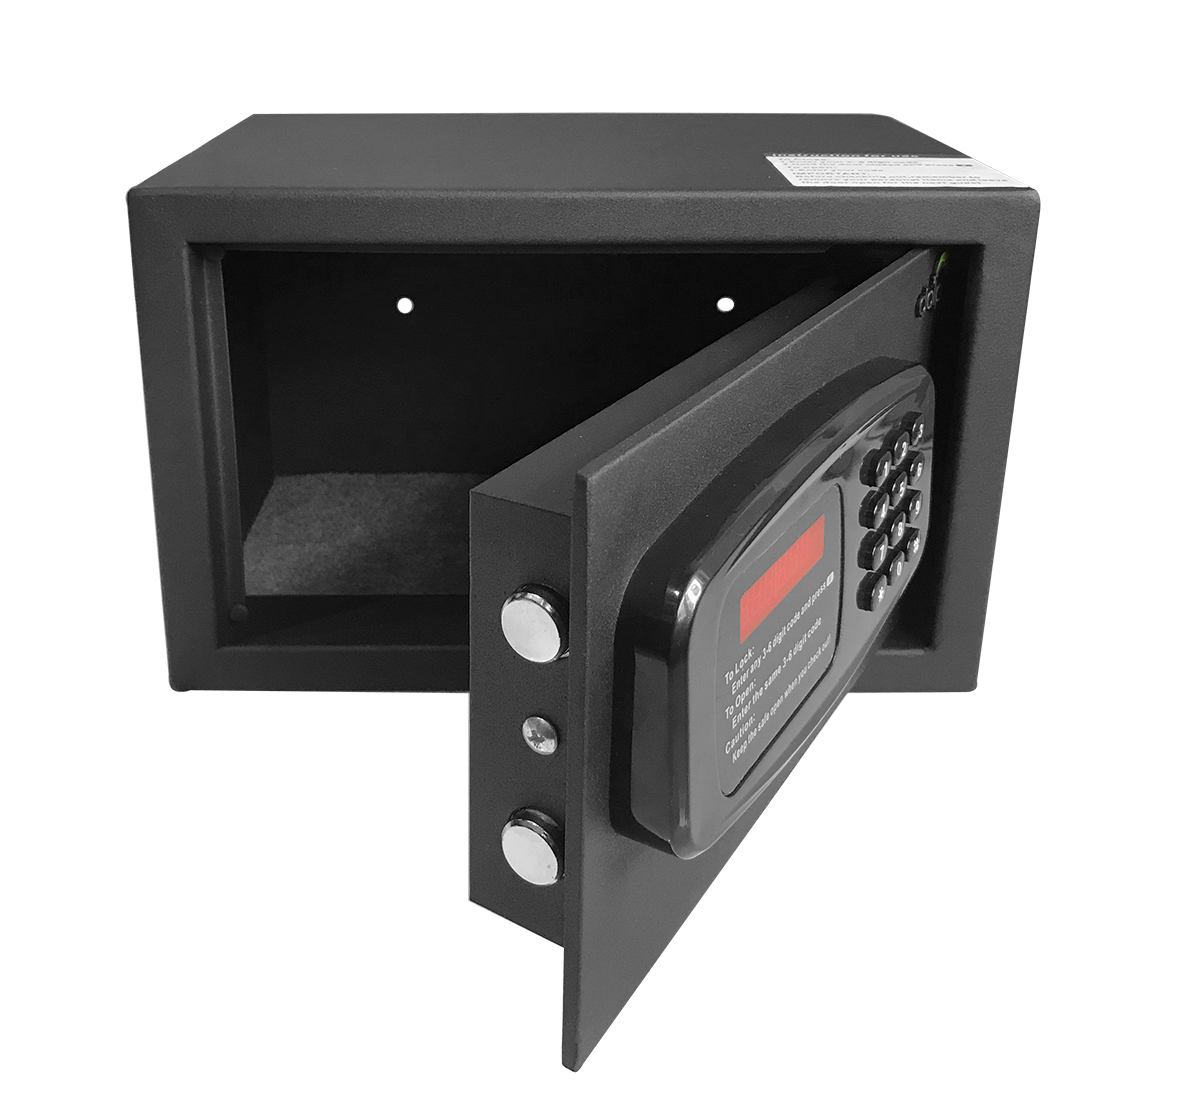 Black small electric safe with automatic door opening